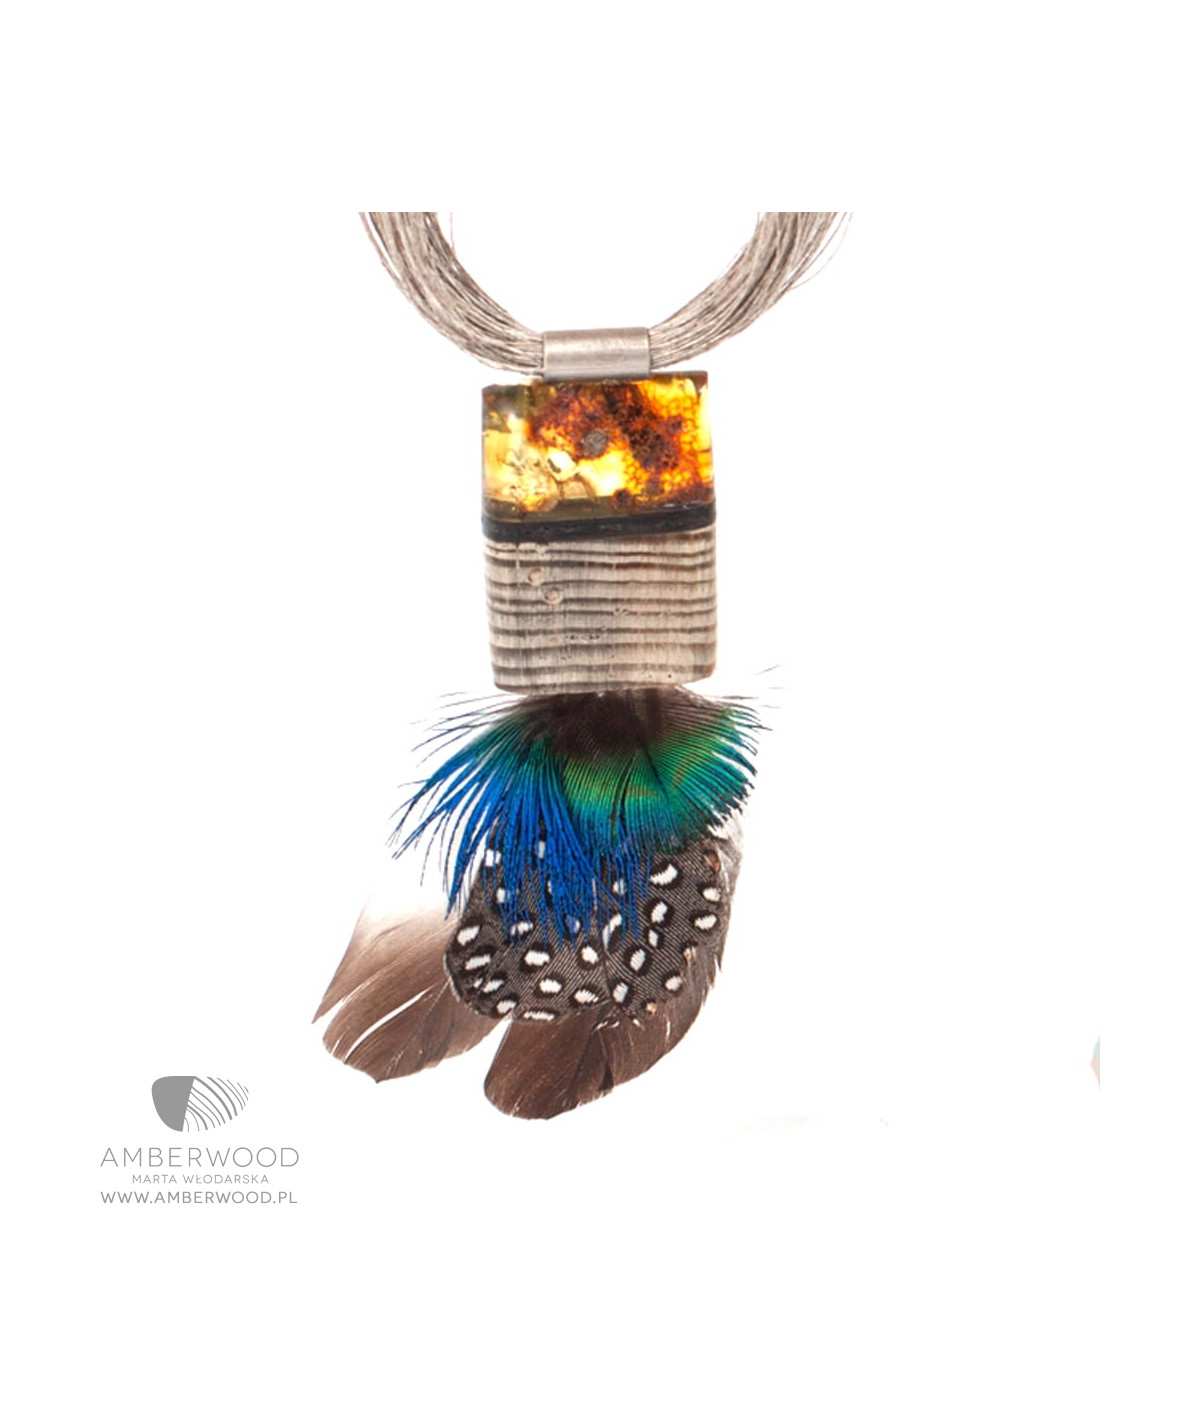 Necklace made of amber, wood, silver and feathers.